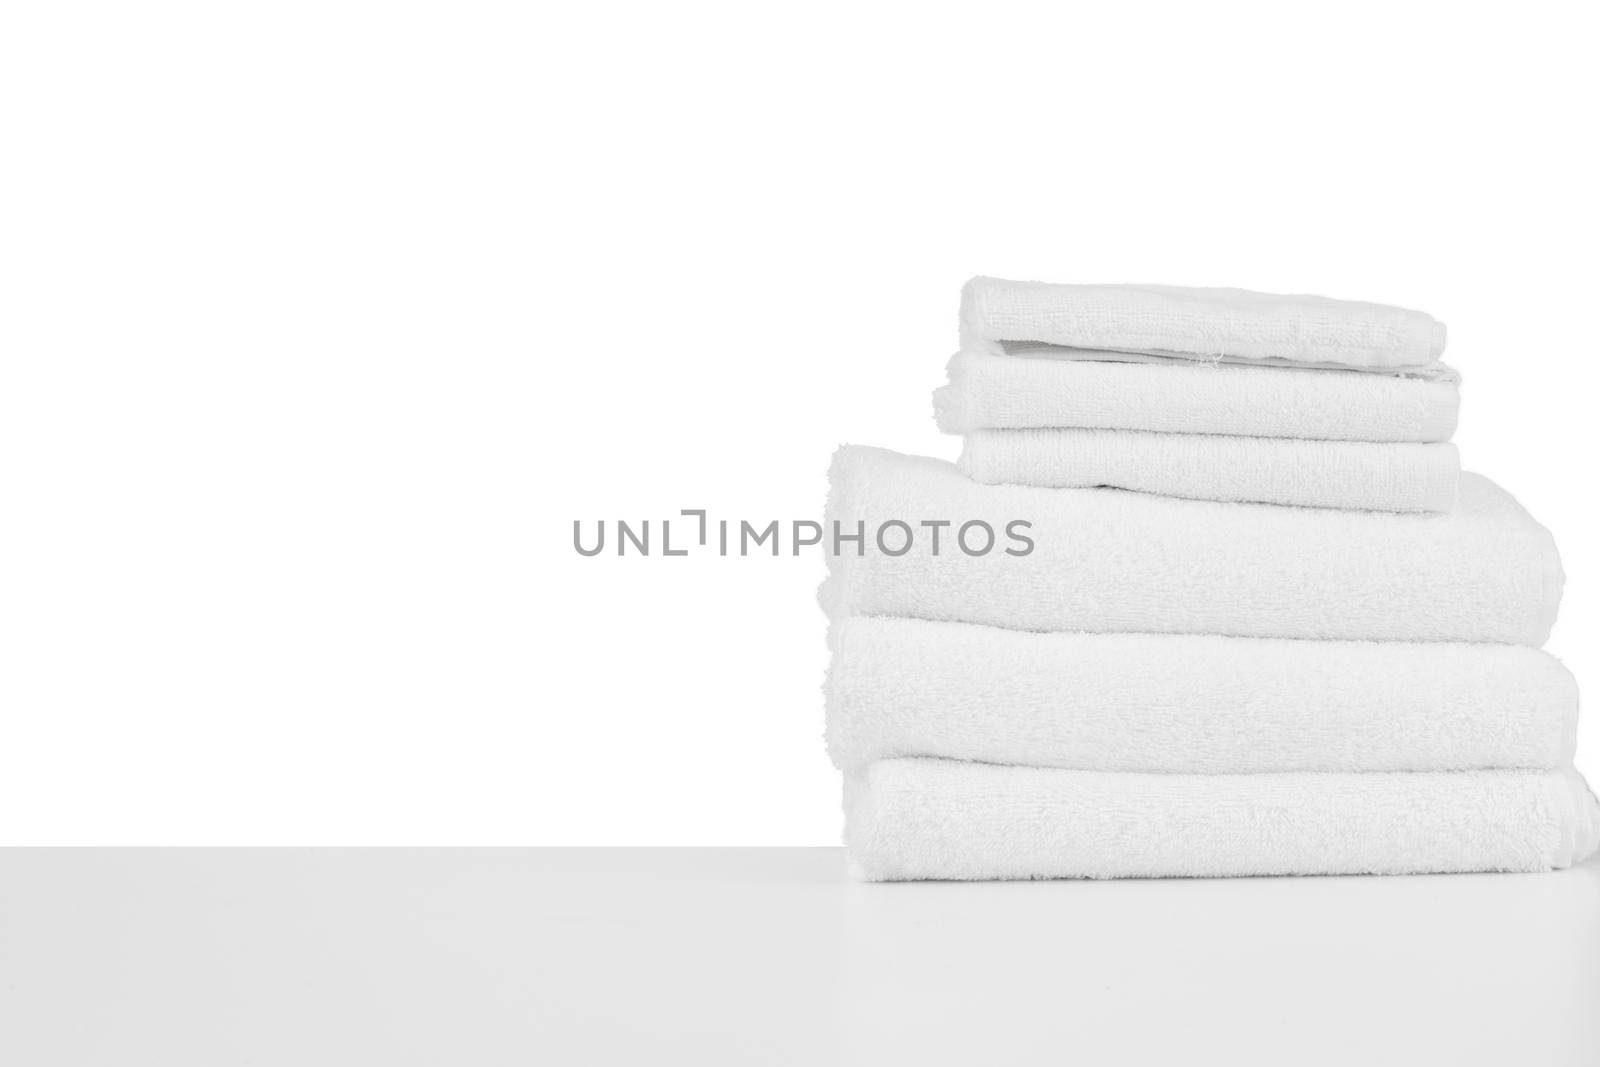 Set of soft spa towels isolated on white background